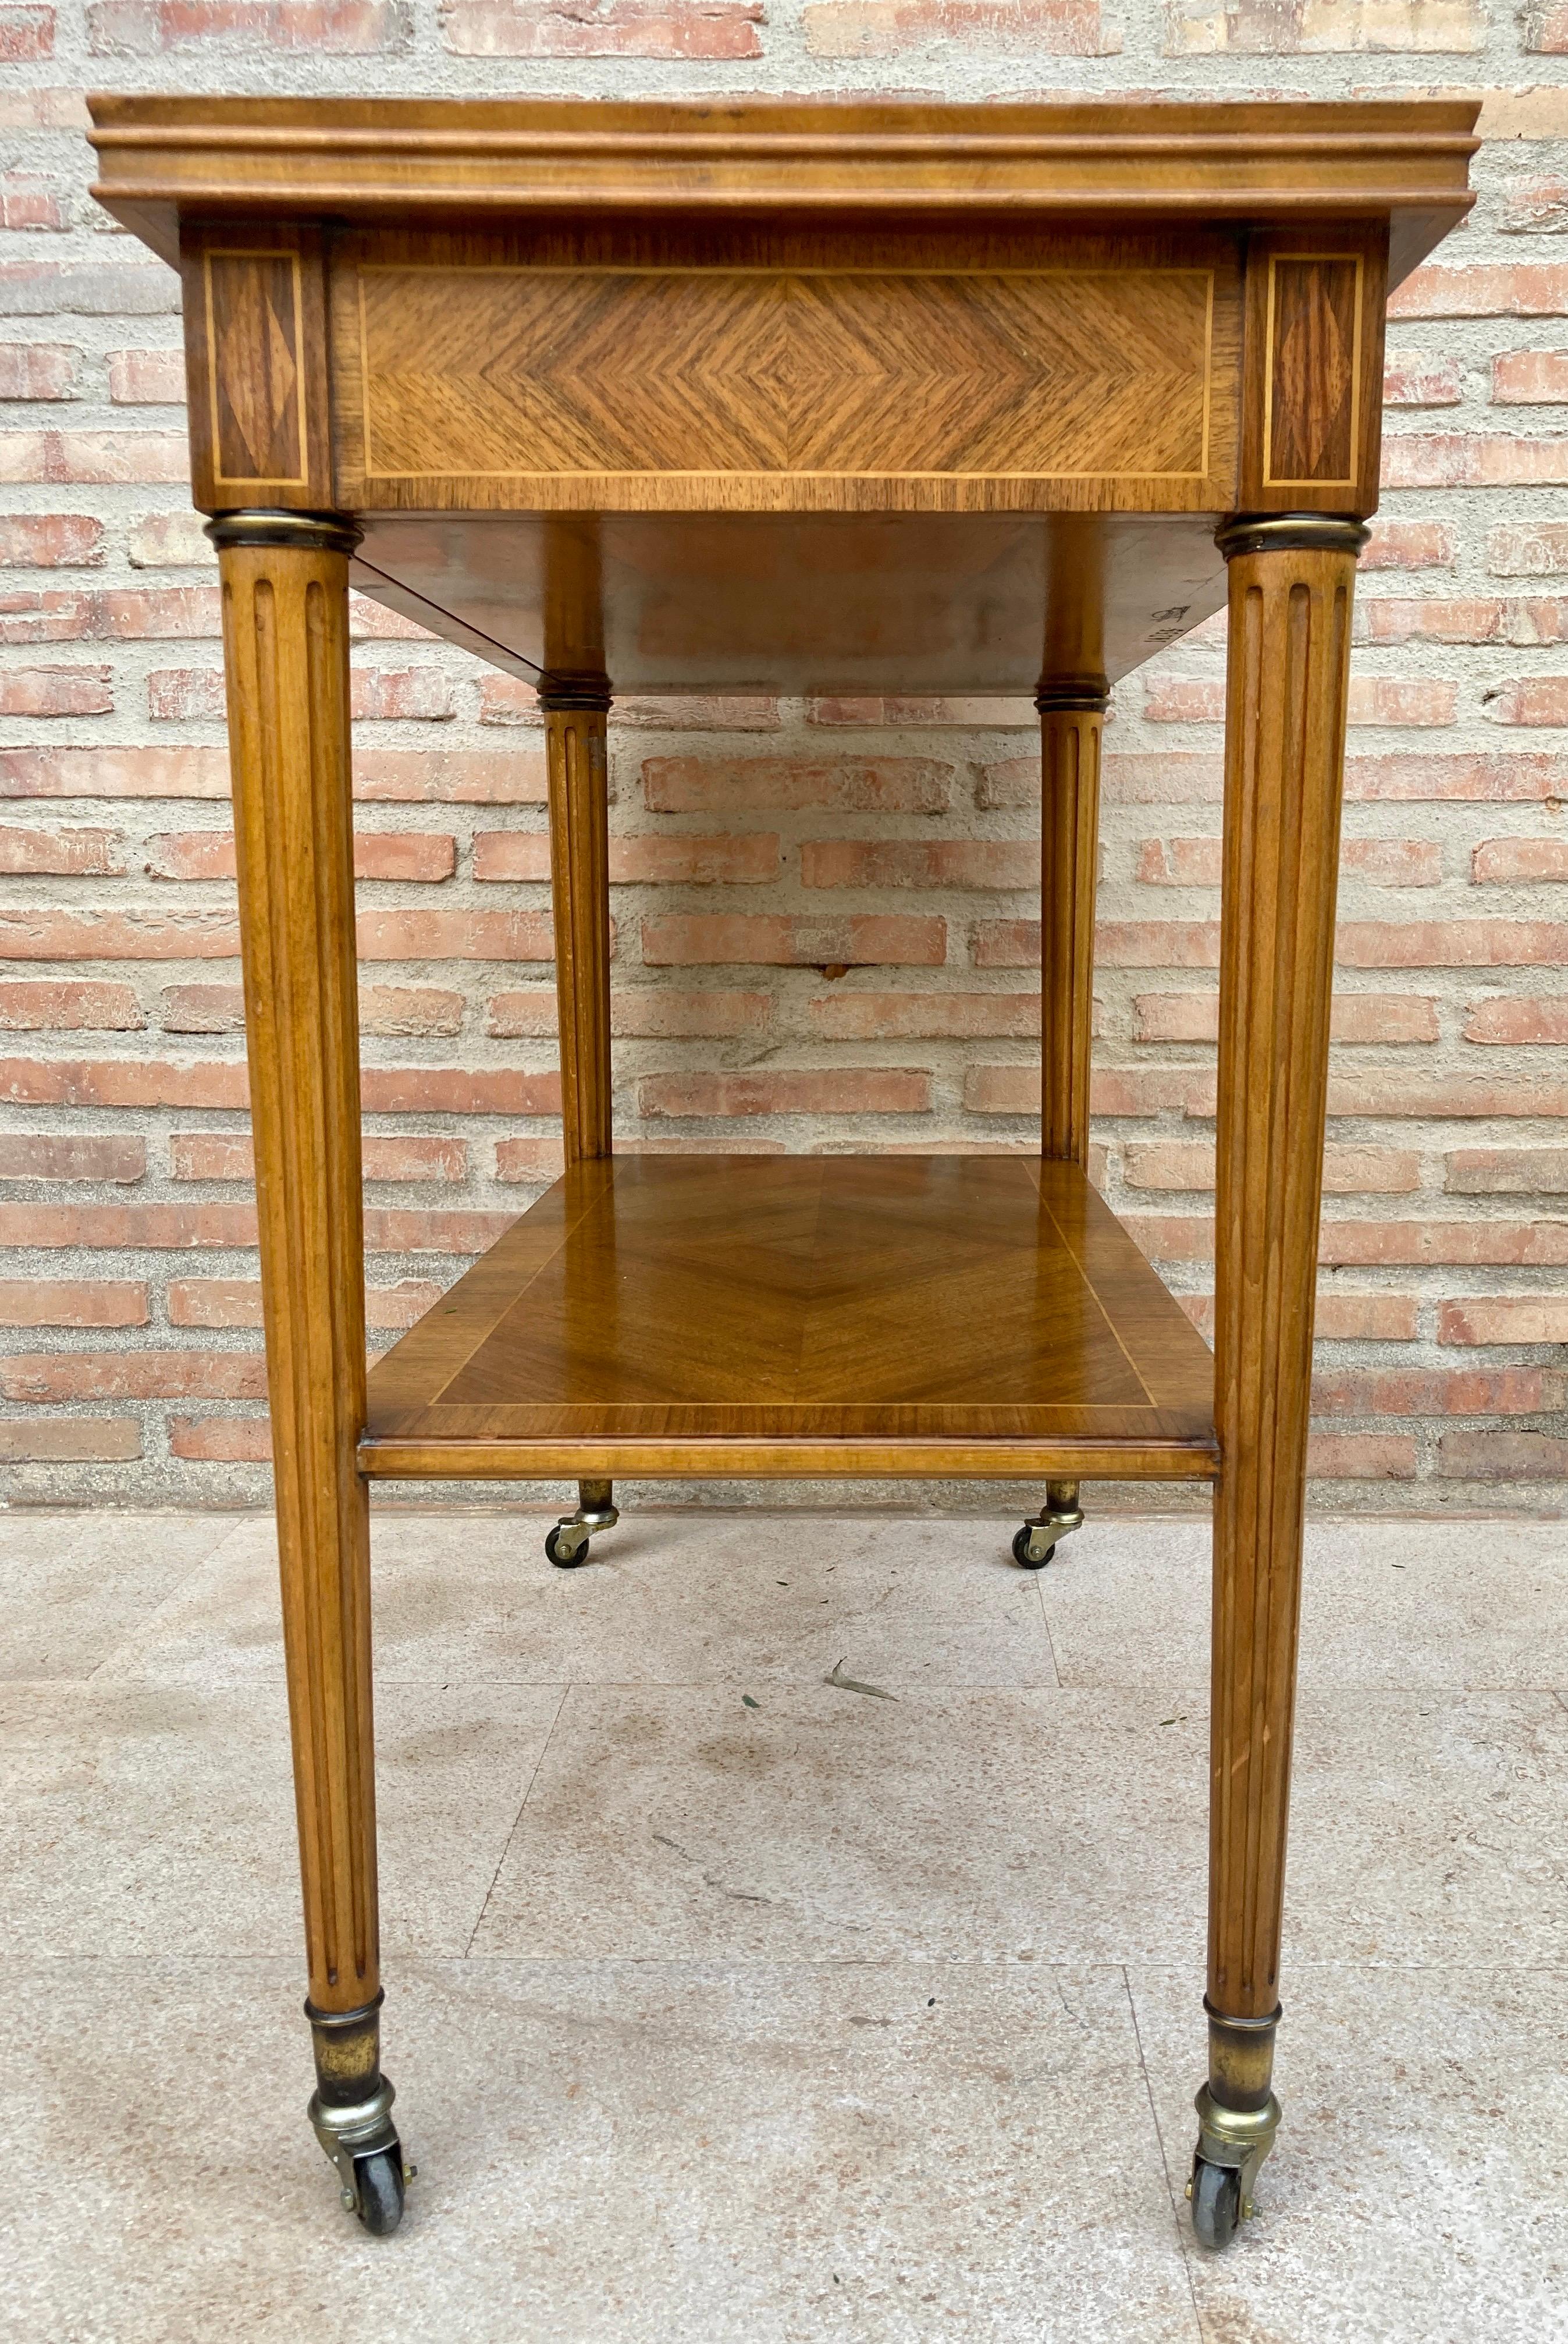 Neoclassic French Marquetry Side Table With One Drawer And Wheels 1940s For Sale 5